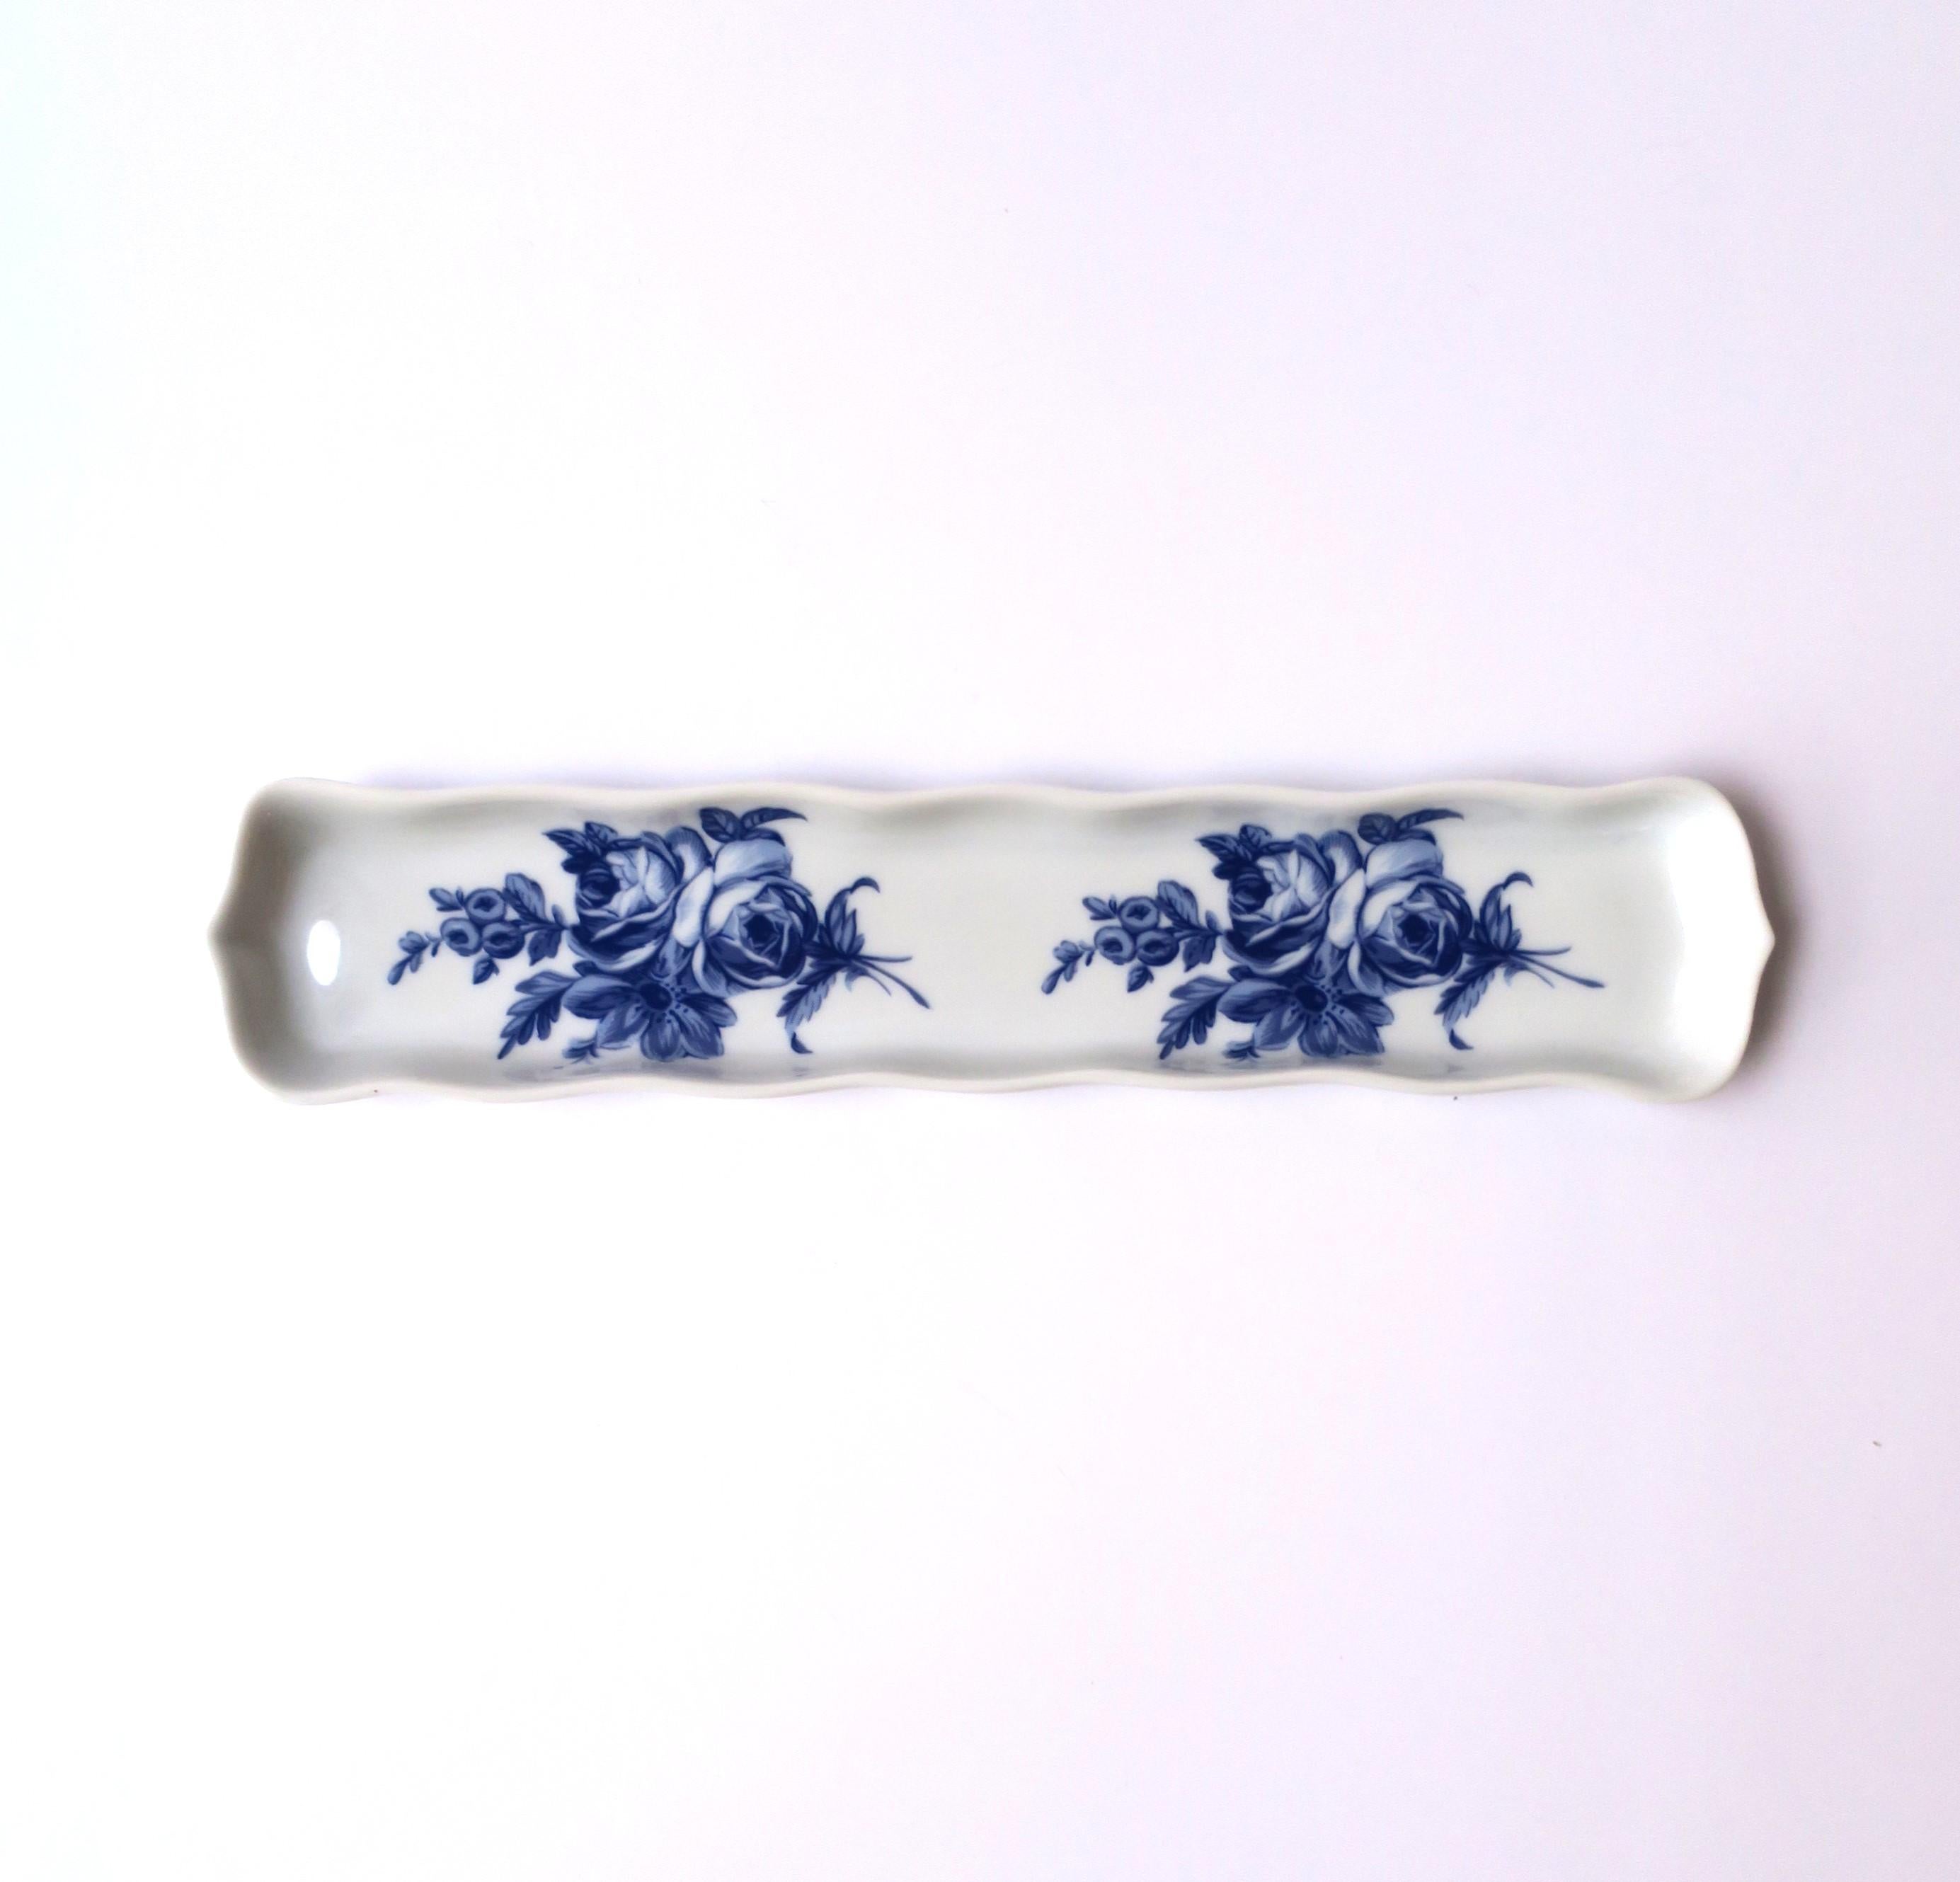 Glazed French Blue and White Porcelain Jewelry Dish 